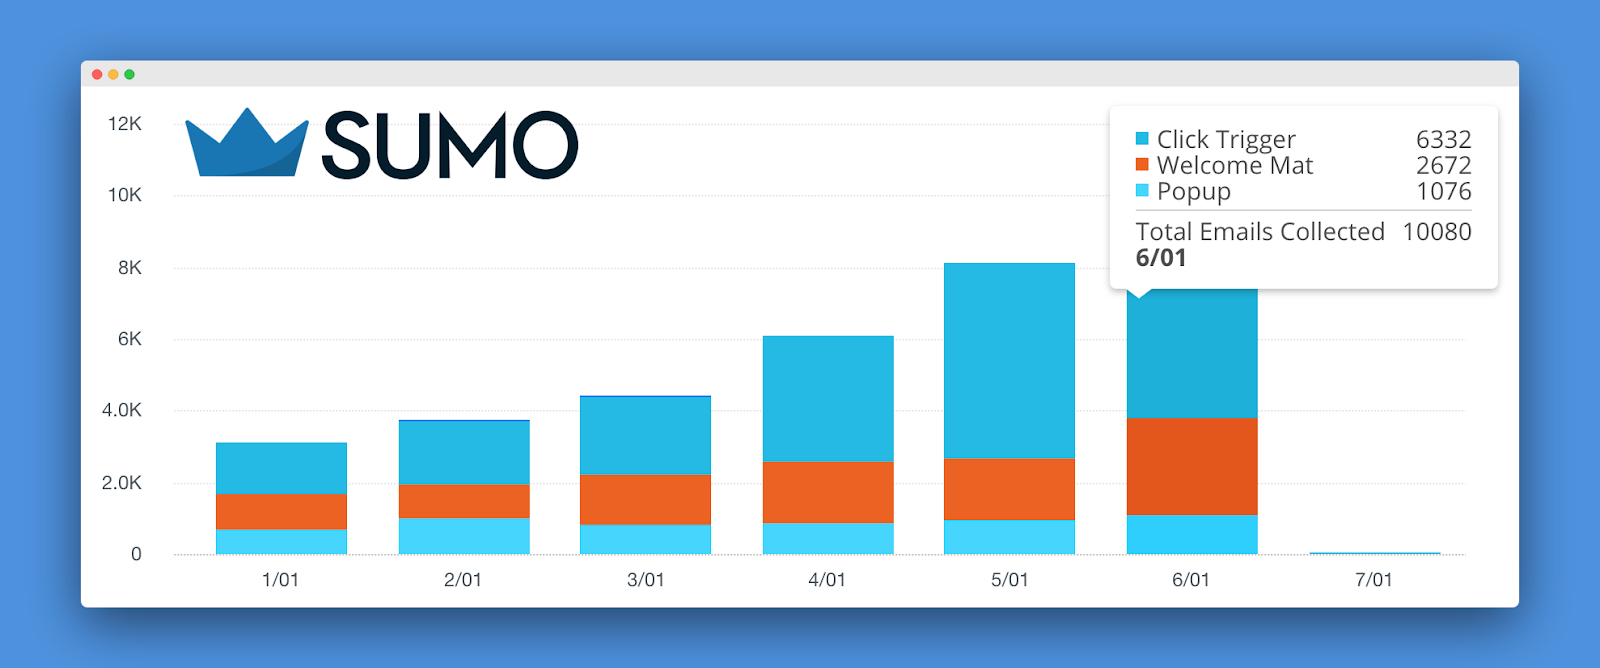 Screenshot of emails collected per month by Sumo